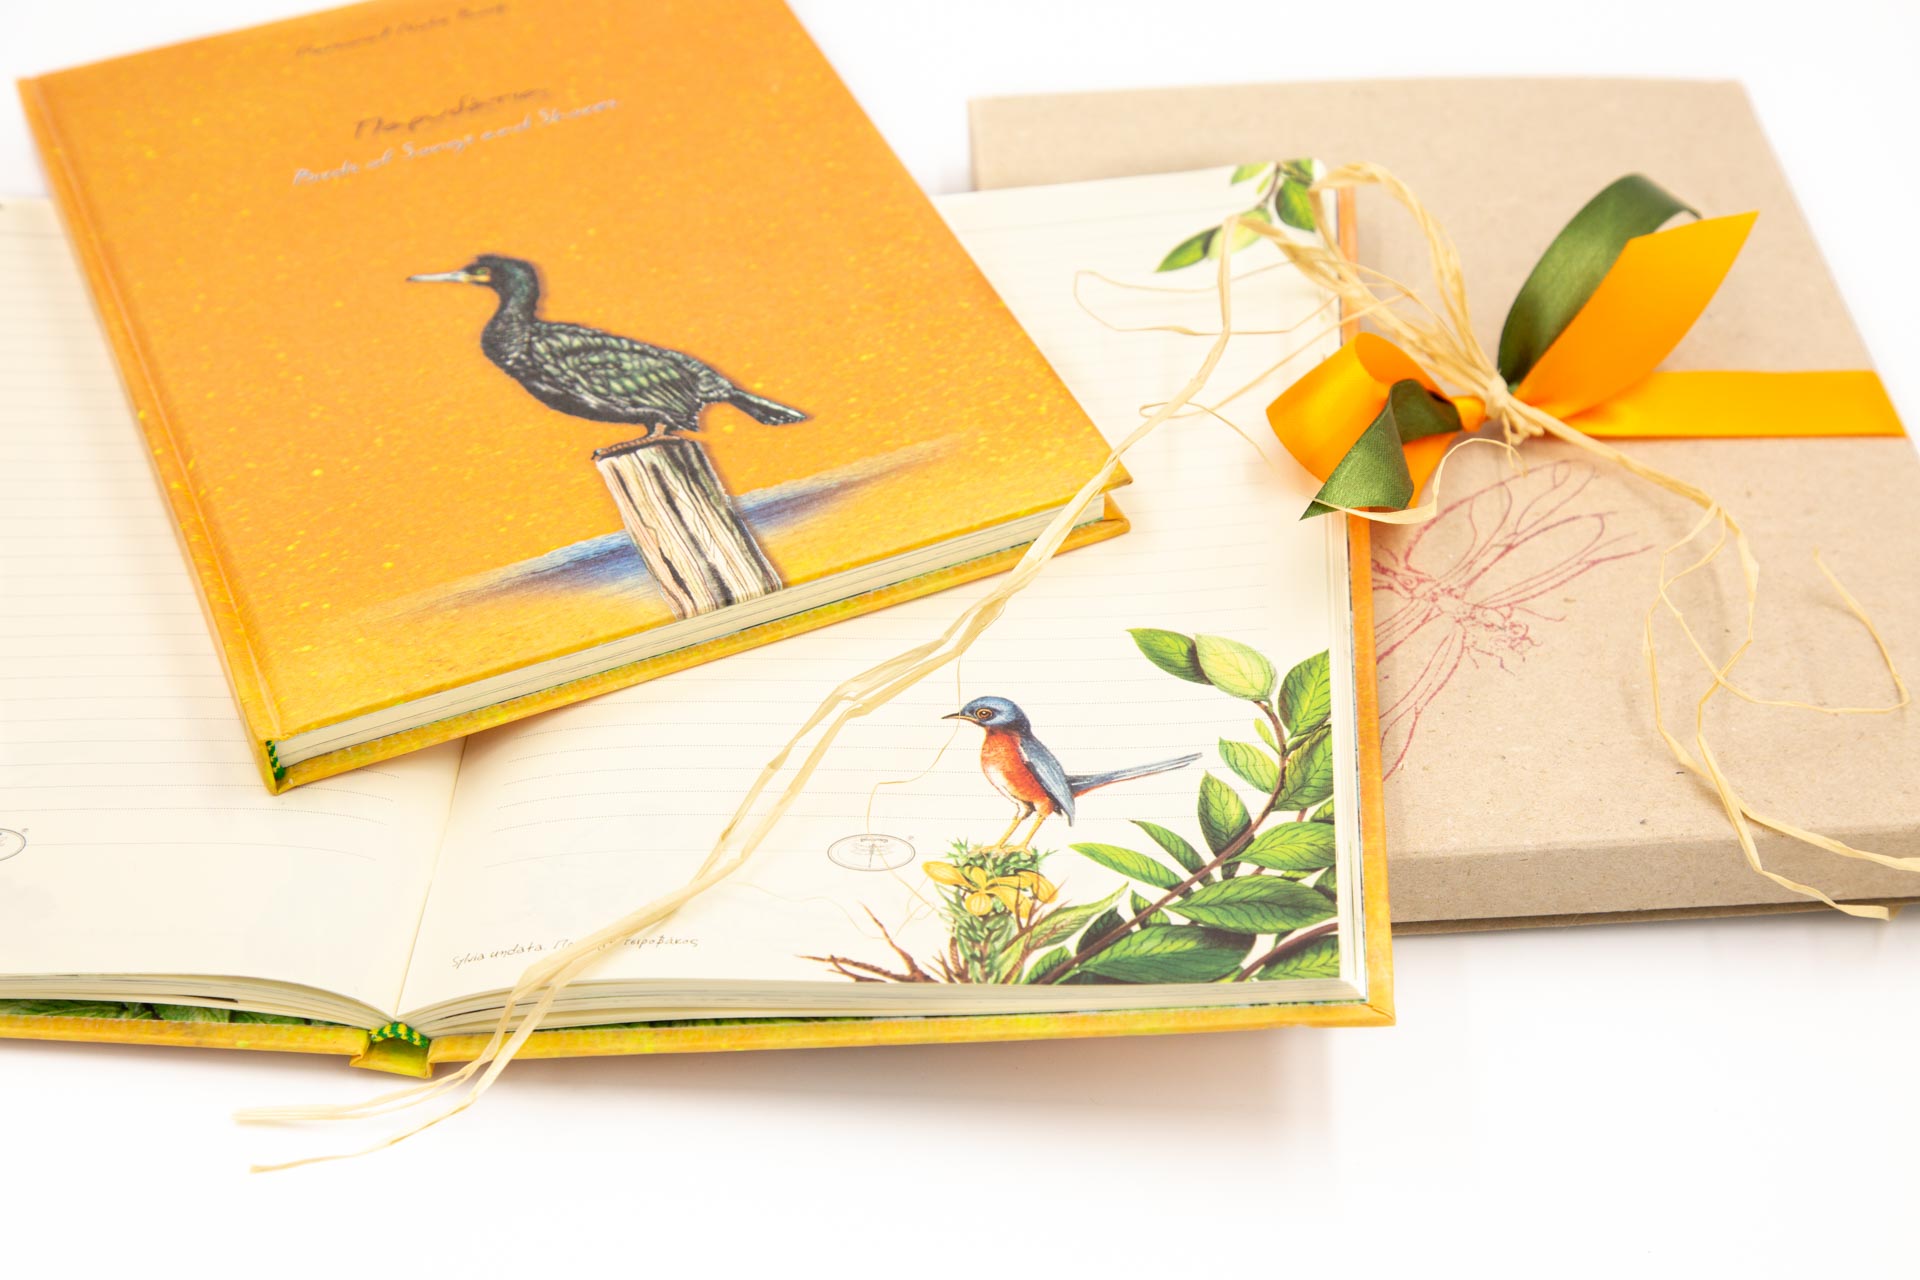 Personal notebook "Birds of Songs and Shores" - Front, Spread and Package